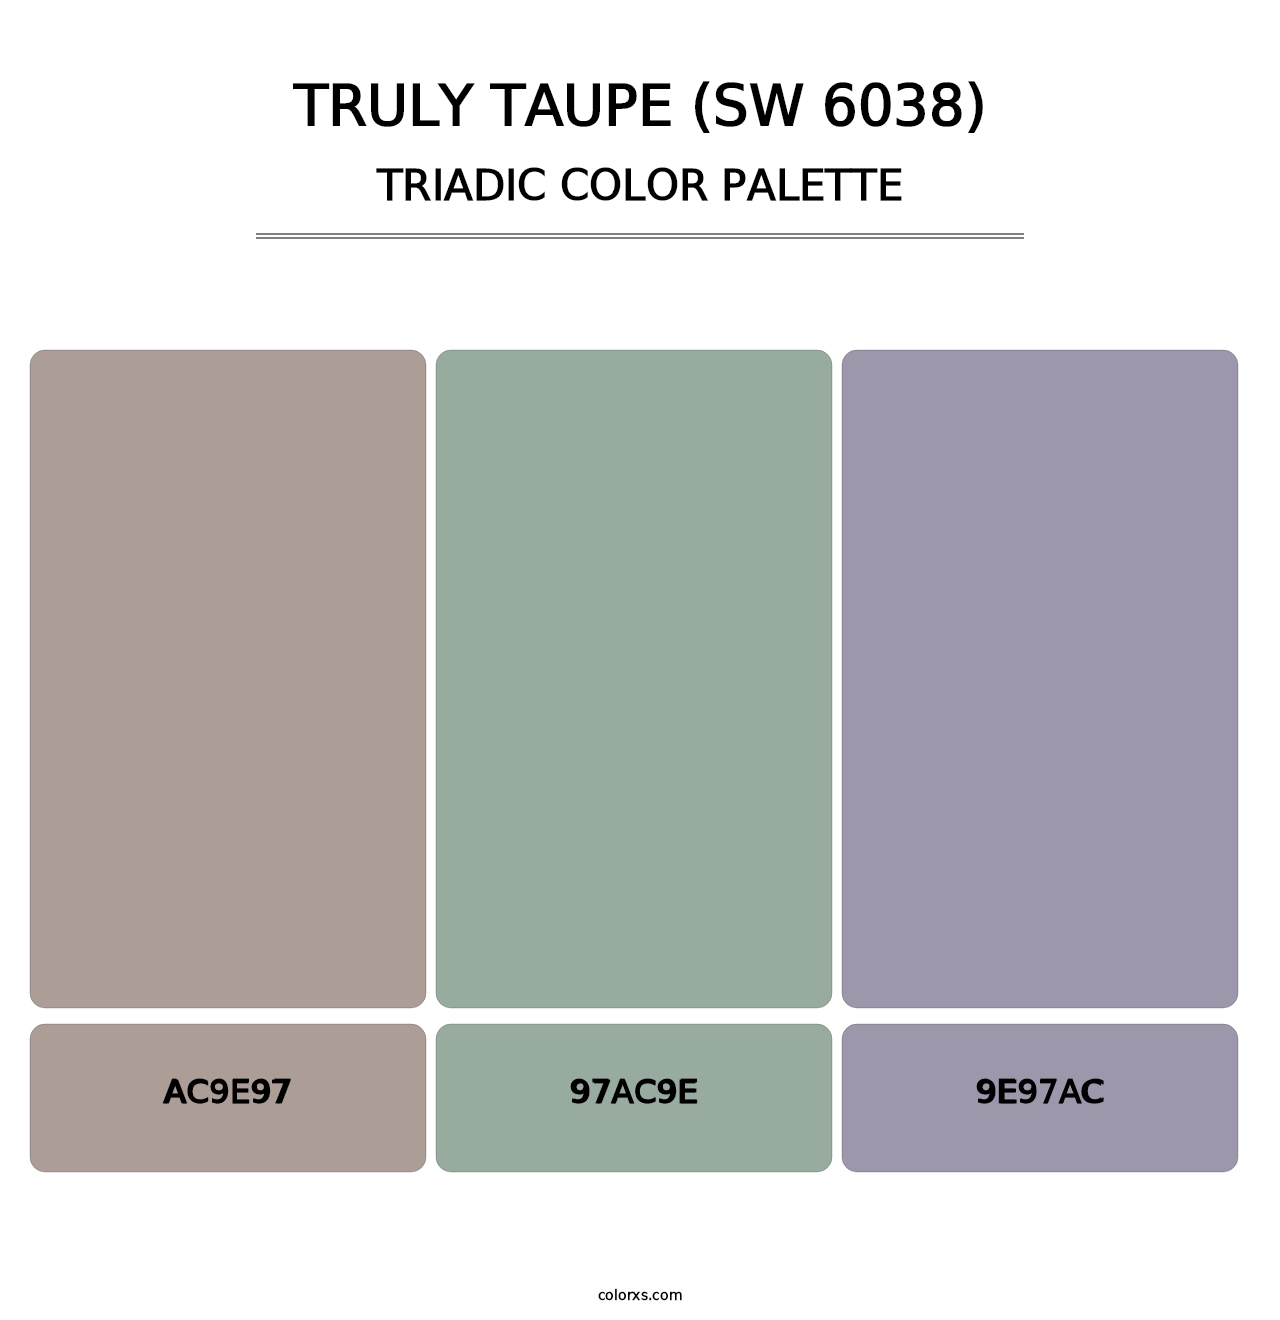 Truly Taupe (SW 6038) - Triadic Color Palette